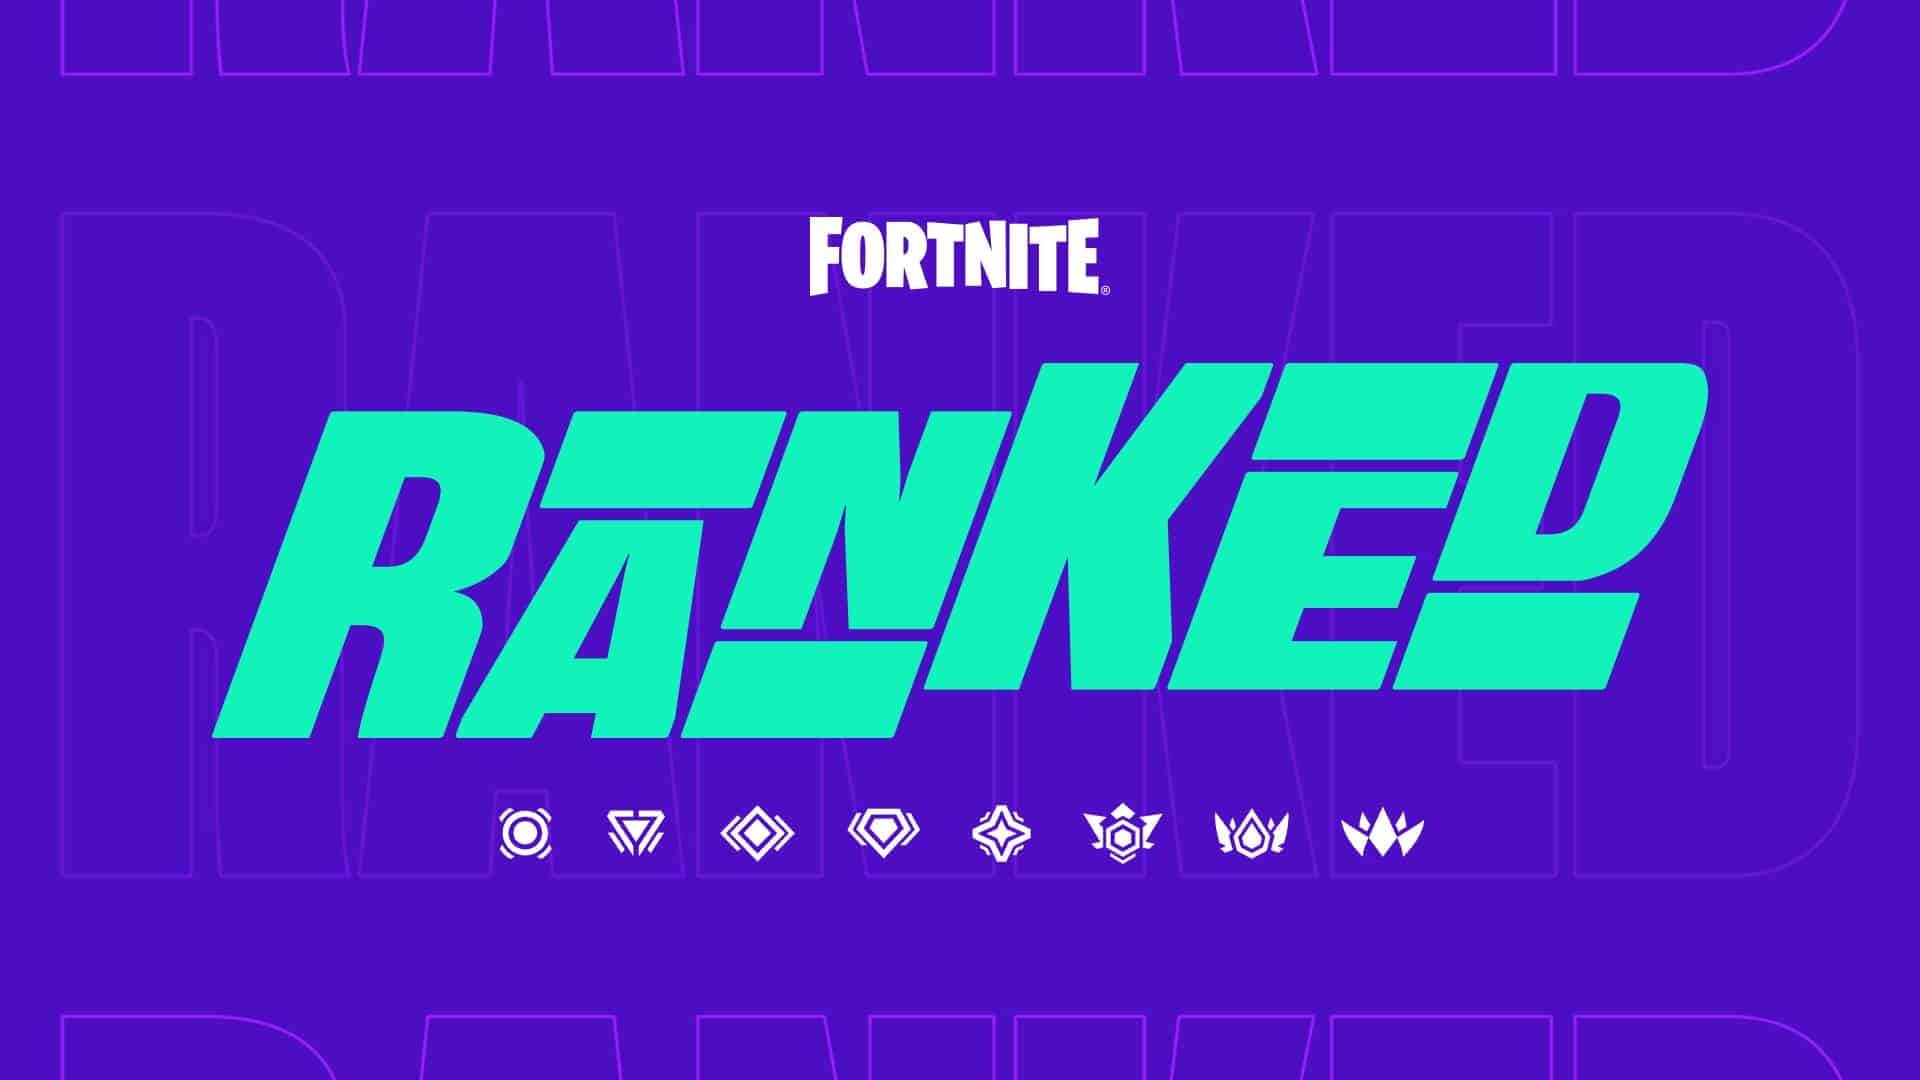 Ranked matches are coming to Fortnite